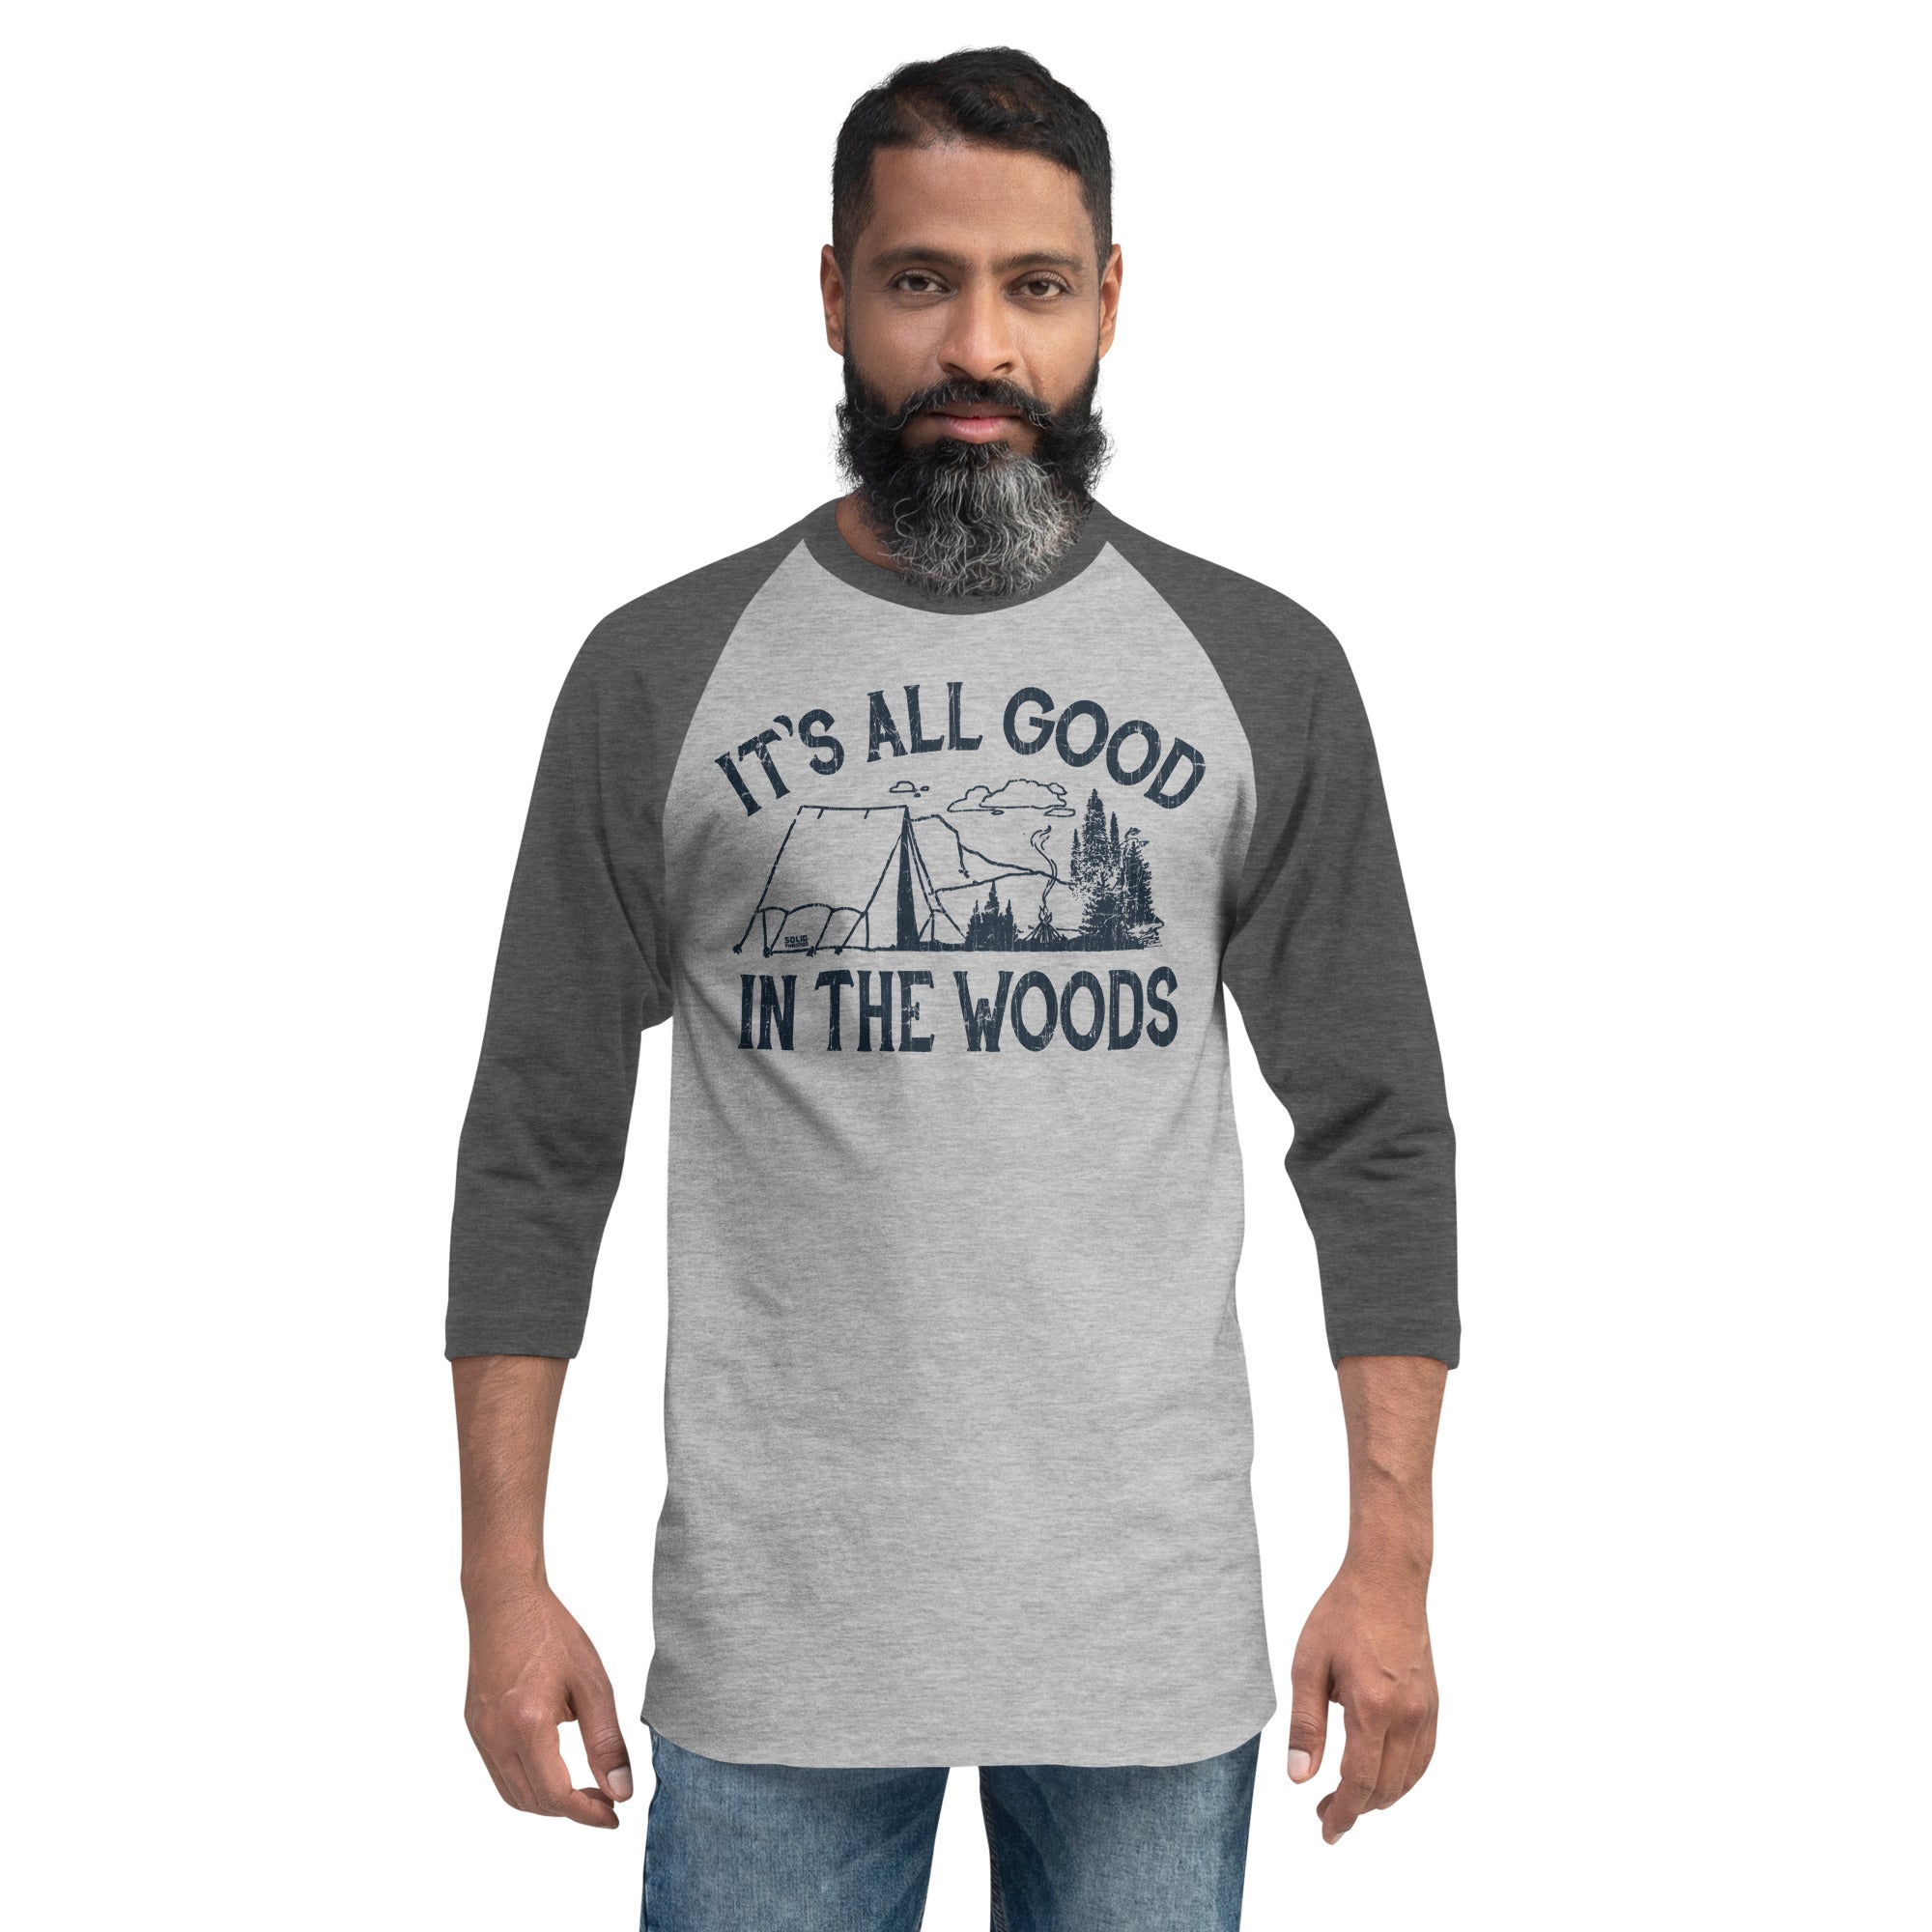 All Good In The Woods Vintage Graphic Raglan Tee | Funny Camping Baseball T-shirt | Solid Threads